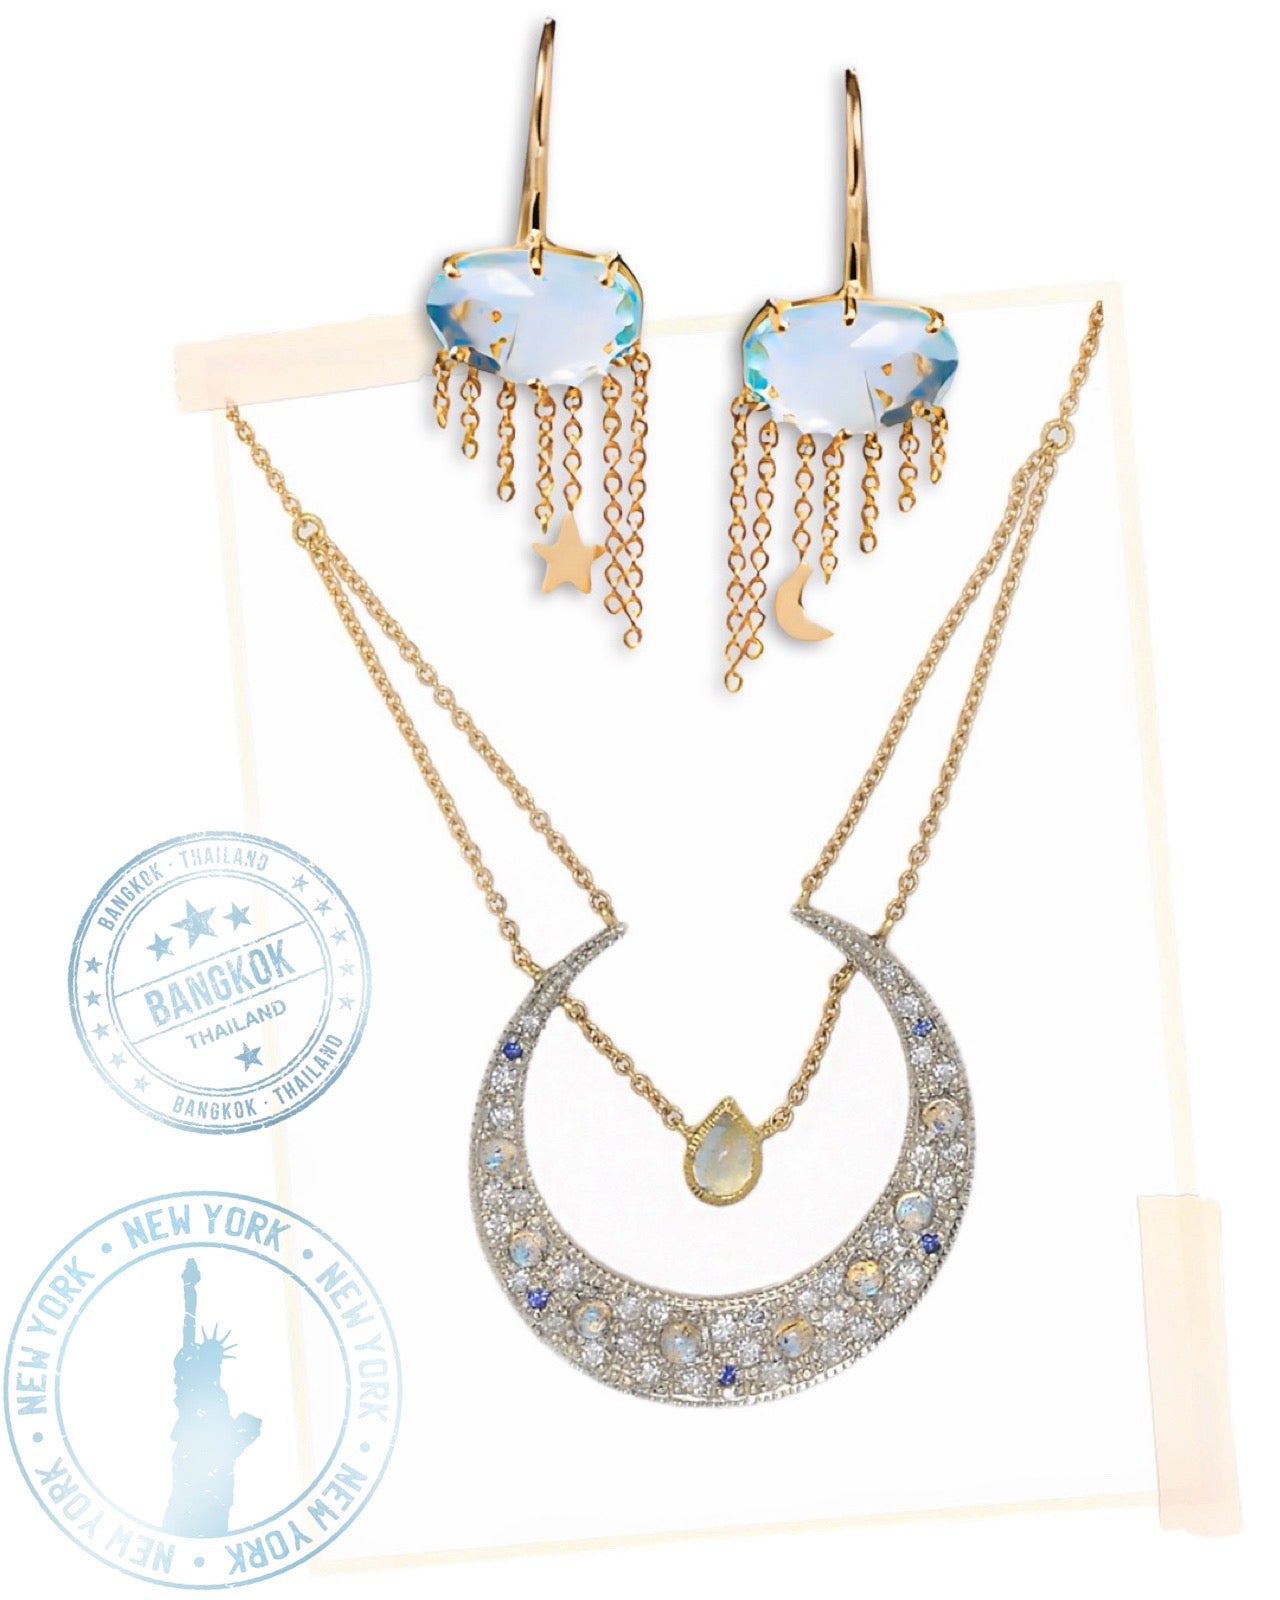 Unhada jewelry collage of 18K gold jewelry, necklaces, earrings. Gold and diamond necklace, Statement earrings, aquamarine nimbus cloud earrings, electic fine jewelry for the free spirited sophisticate, wearable magic,